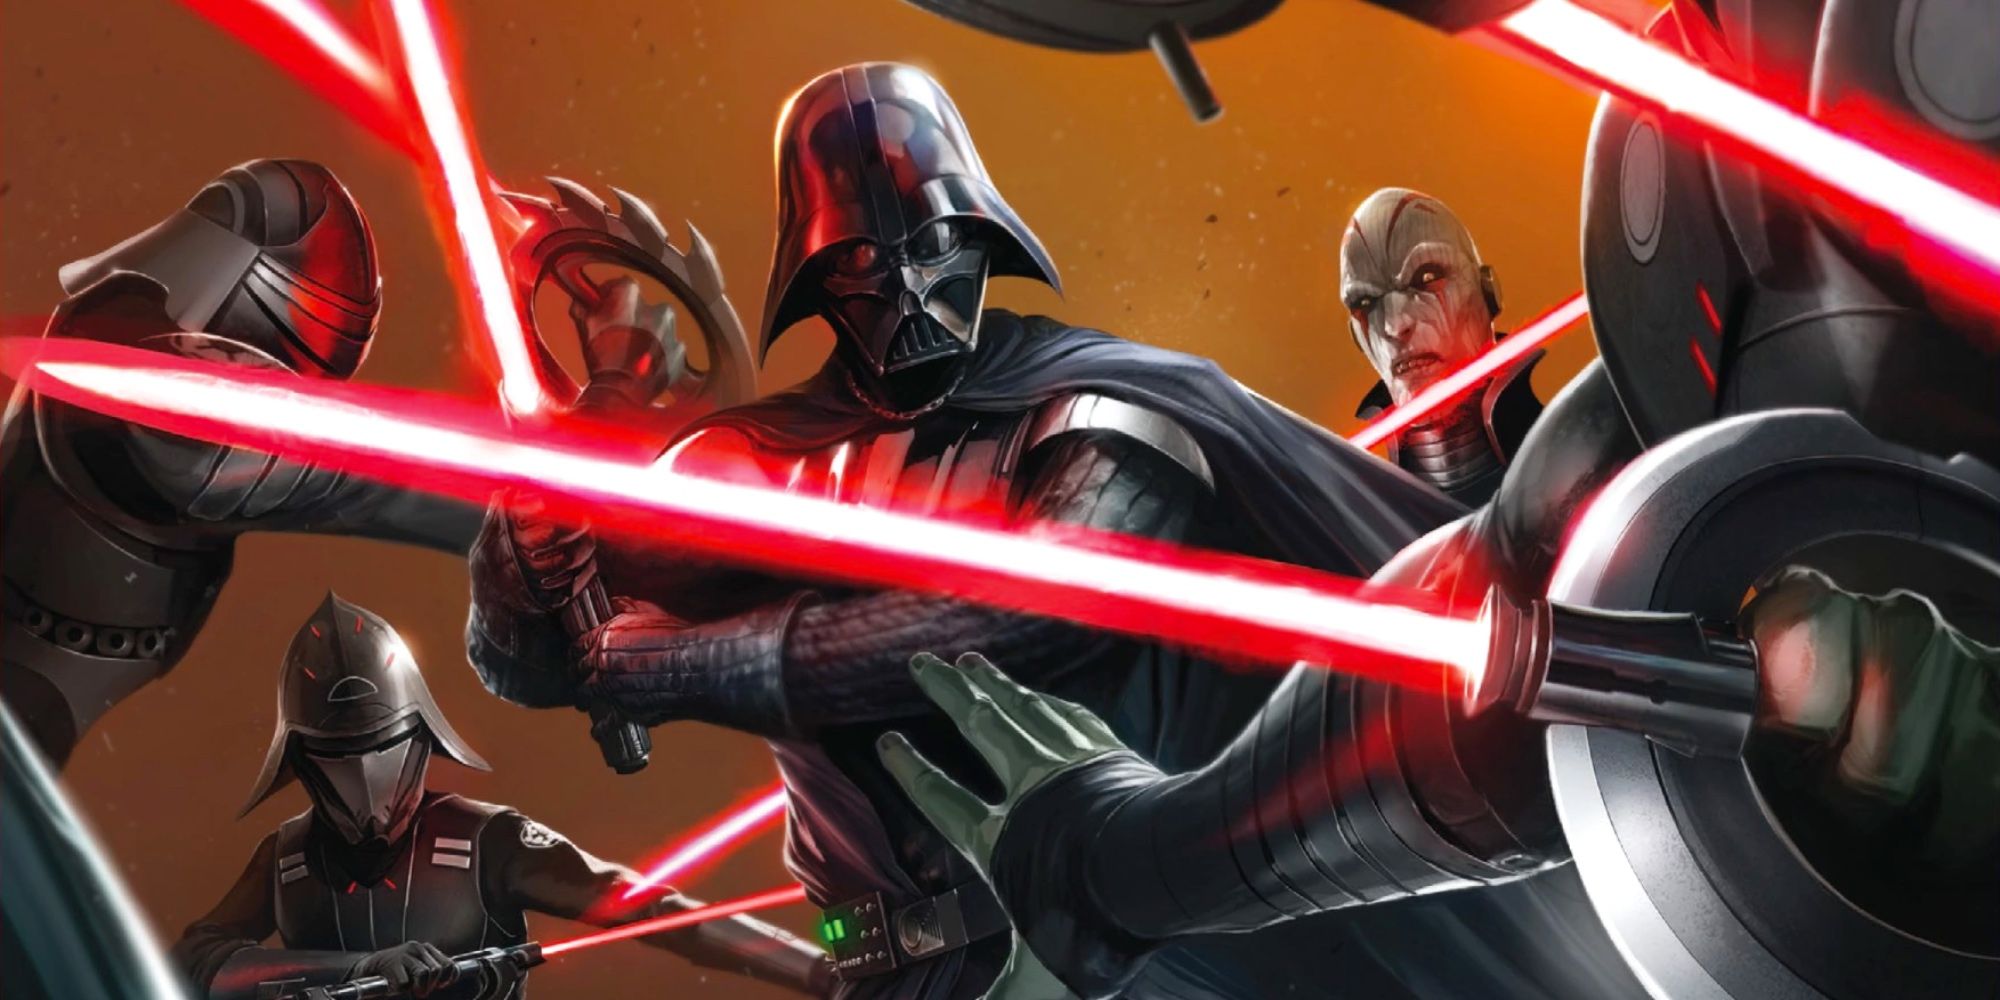 Darth Vader and Imperial Inquisitors with lightsabers drawn.